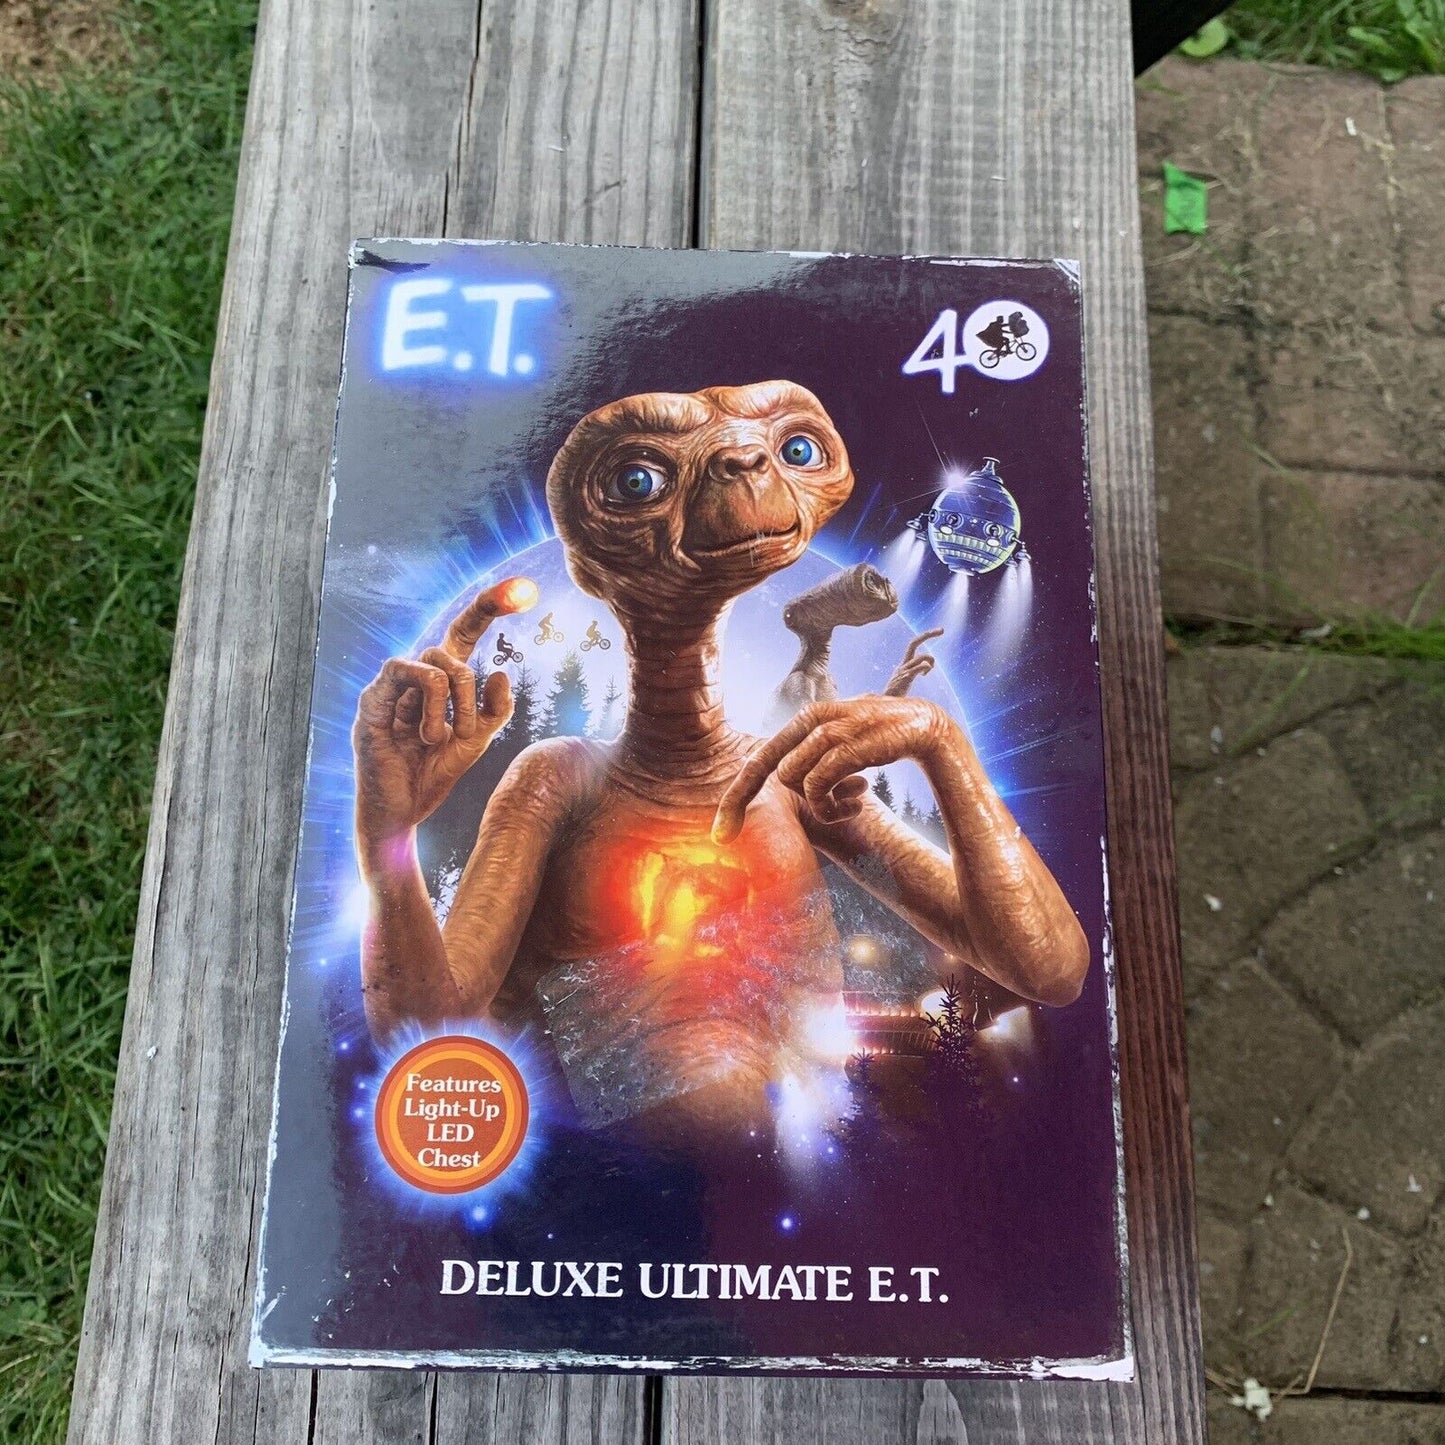 NECA Deluxe E.T. Ultimate Action Figure LED Chest Light Up 40th Anniversary